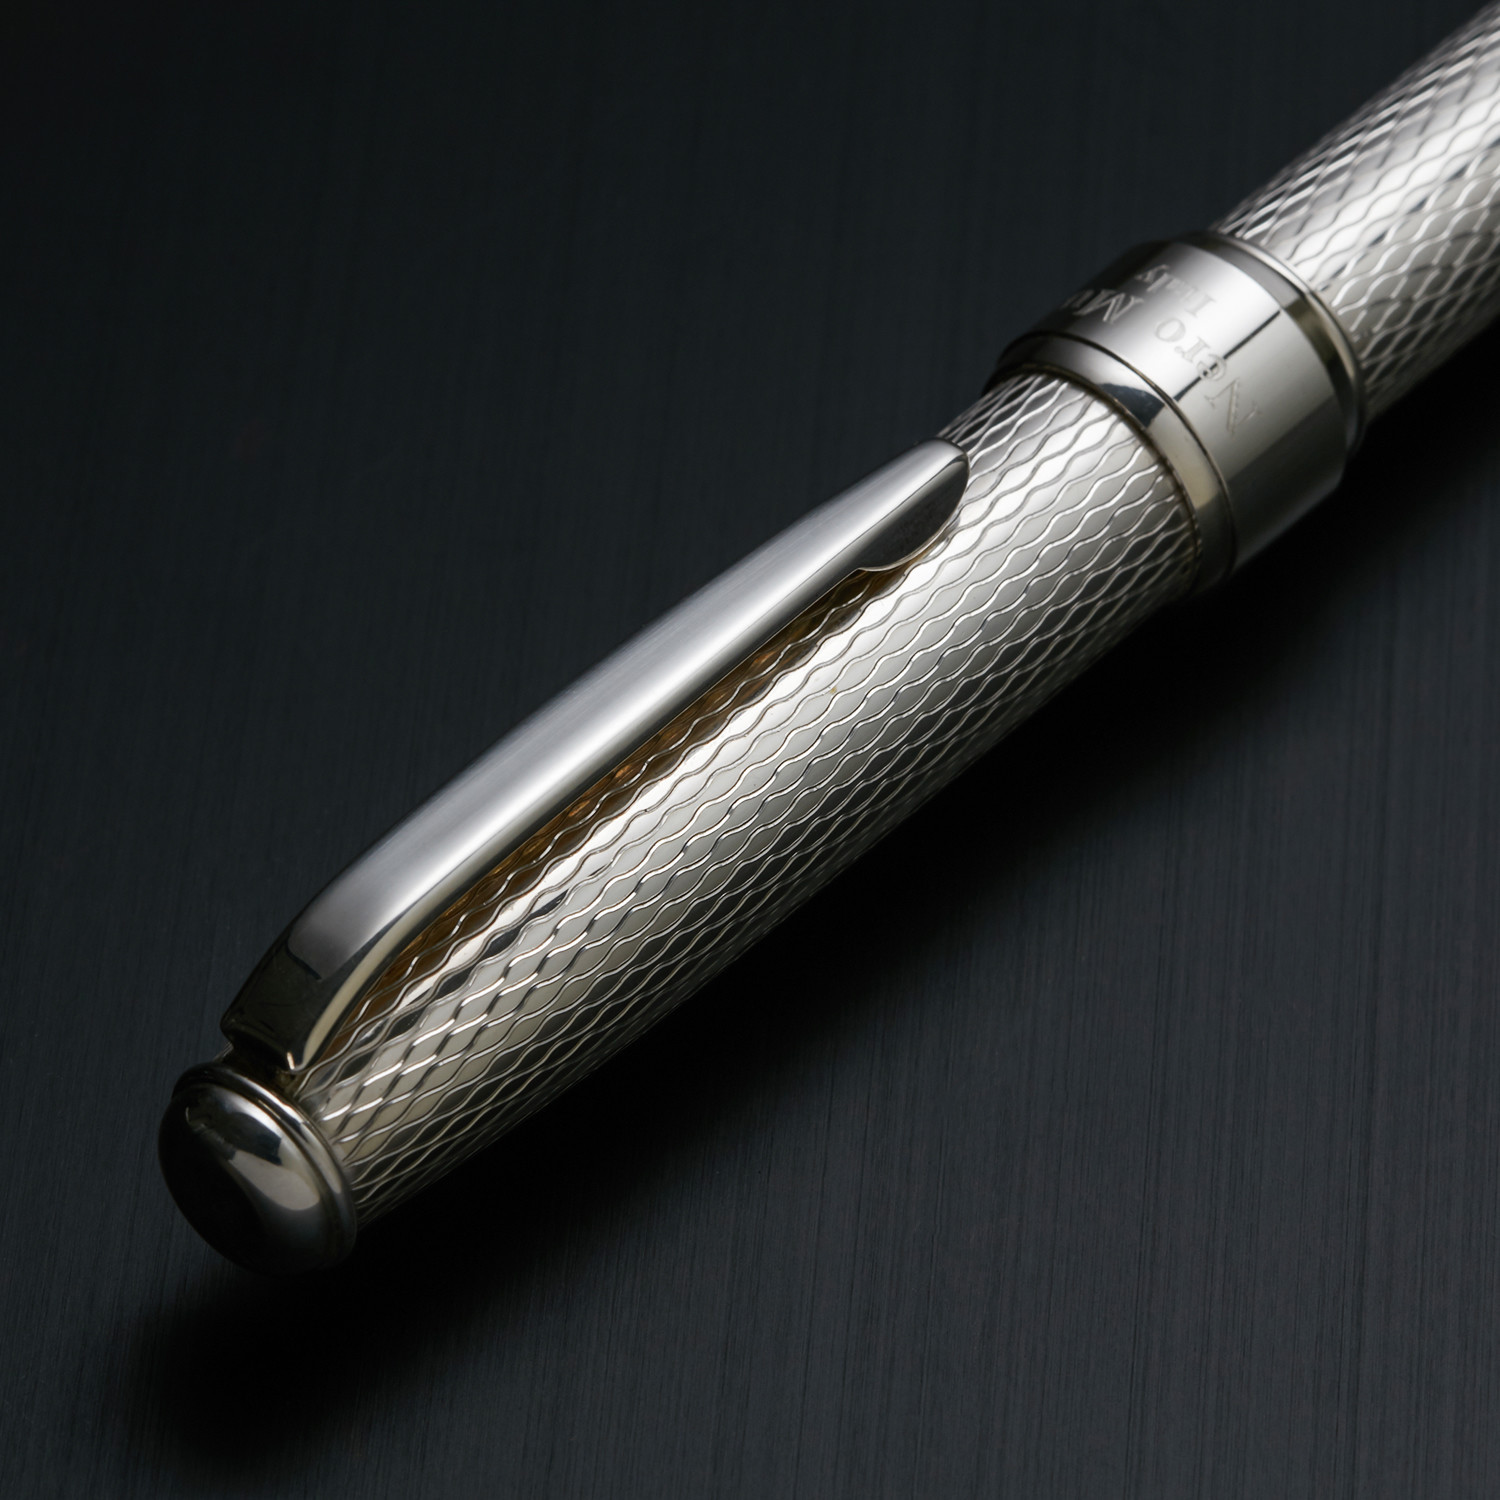 Solid 925 Silver Fountain Pen // Classic Barley Engraving (Fine Point ...